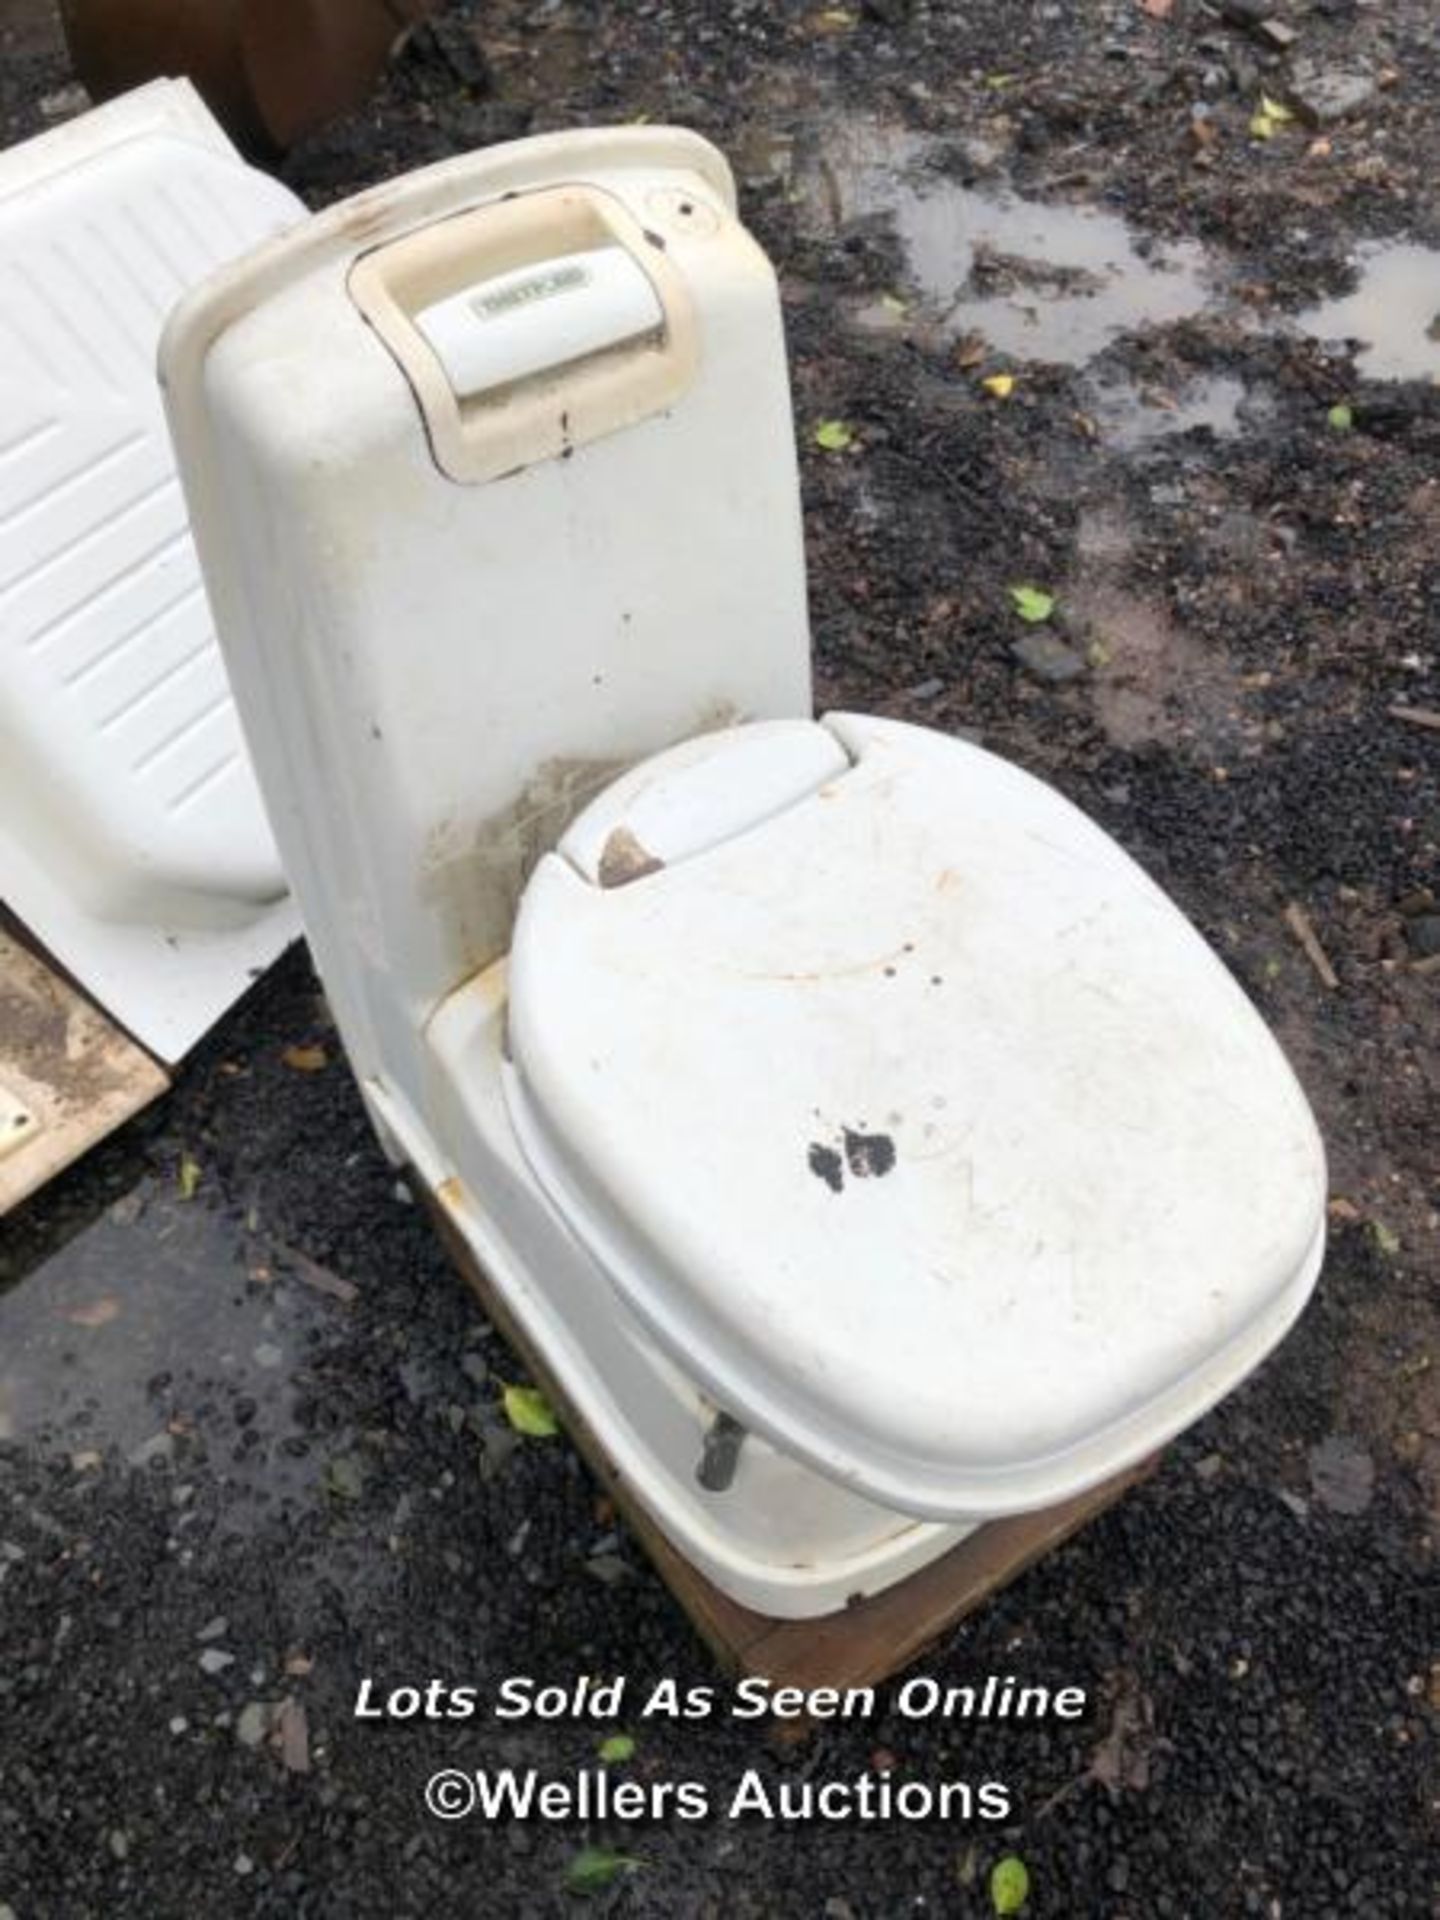 2X THETFORD ELECTRIC 12V TOILETS, SHOWER TRAY AND SINK / NO VAT ON HAMMER PRICE - Image 5 of 6